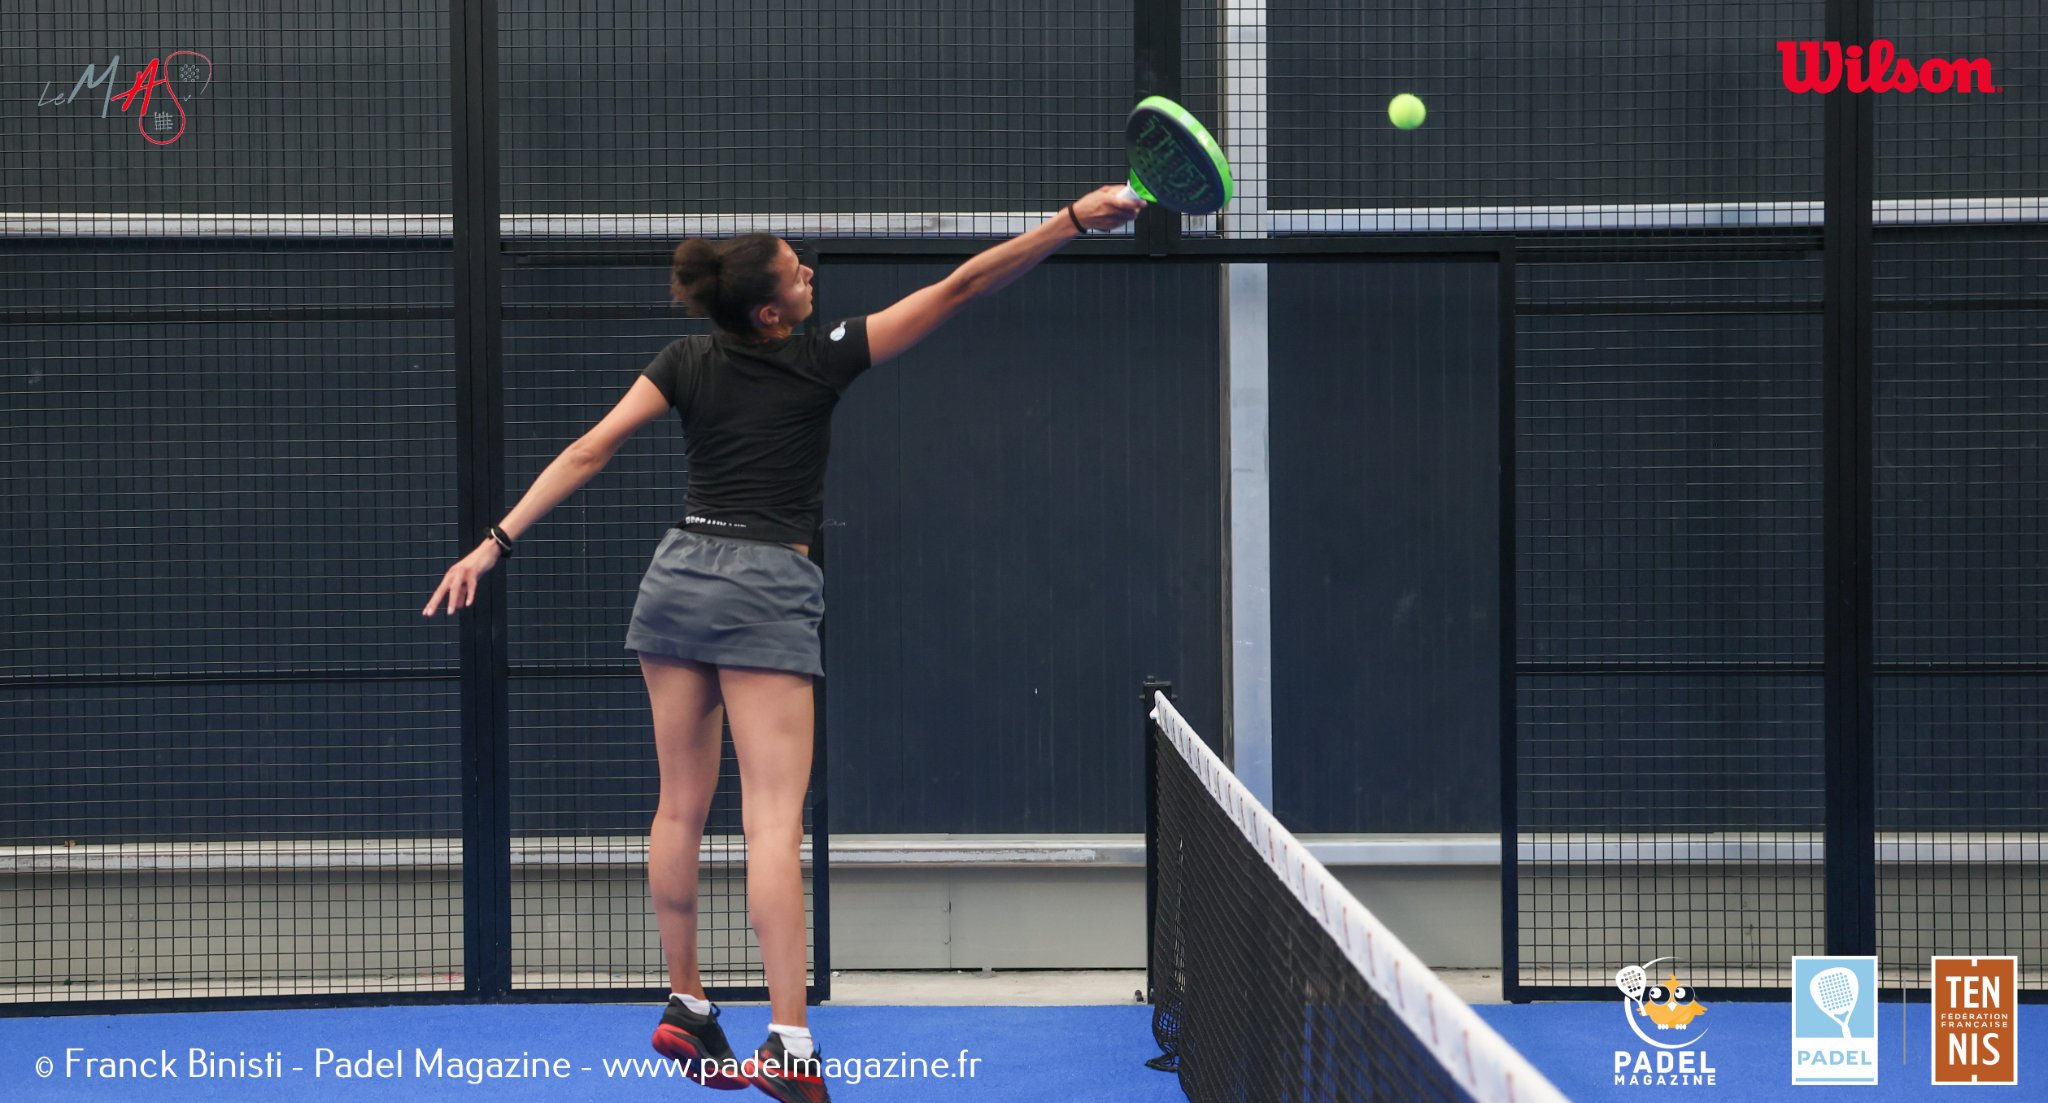 FFT Padel Tour Perpignan: a ladies' final in the form of revenge